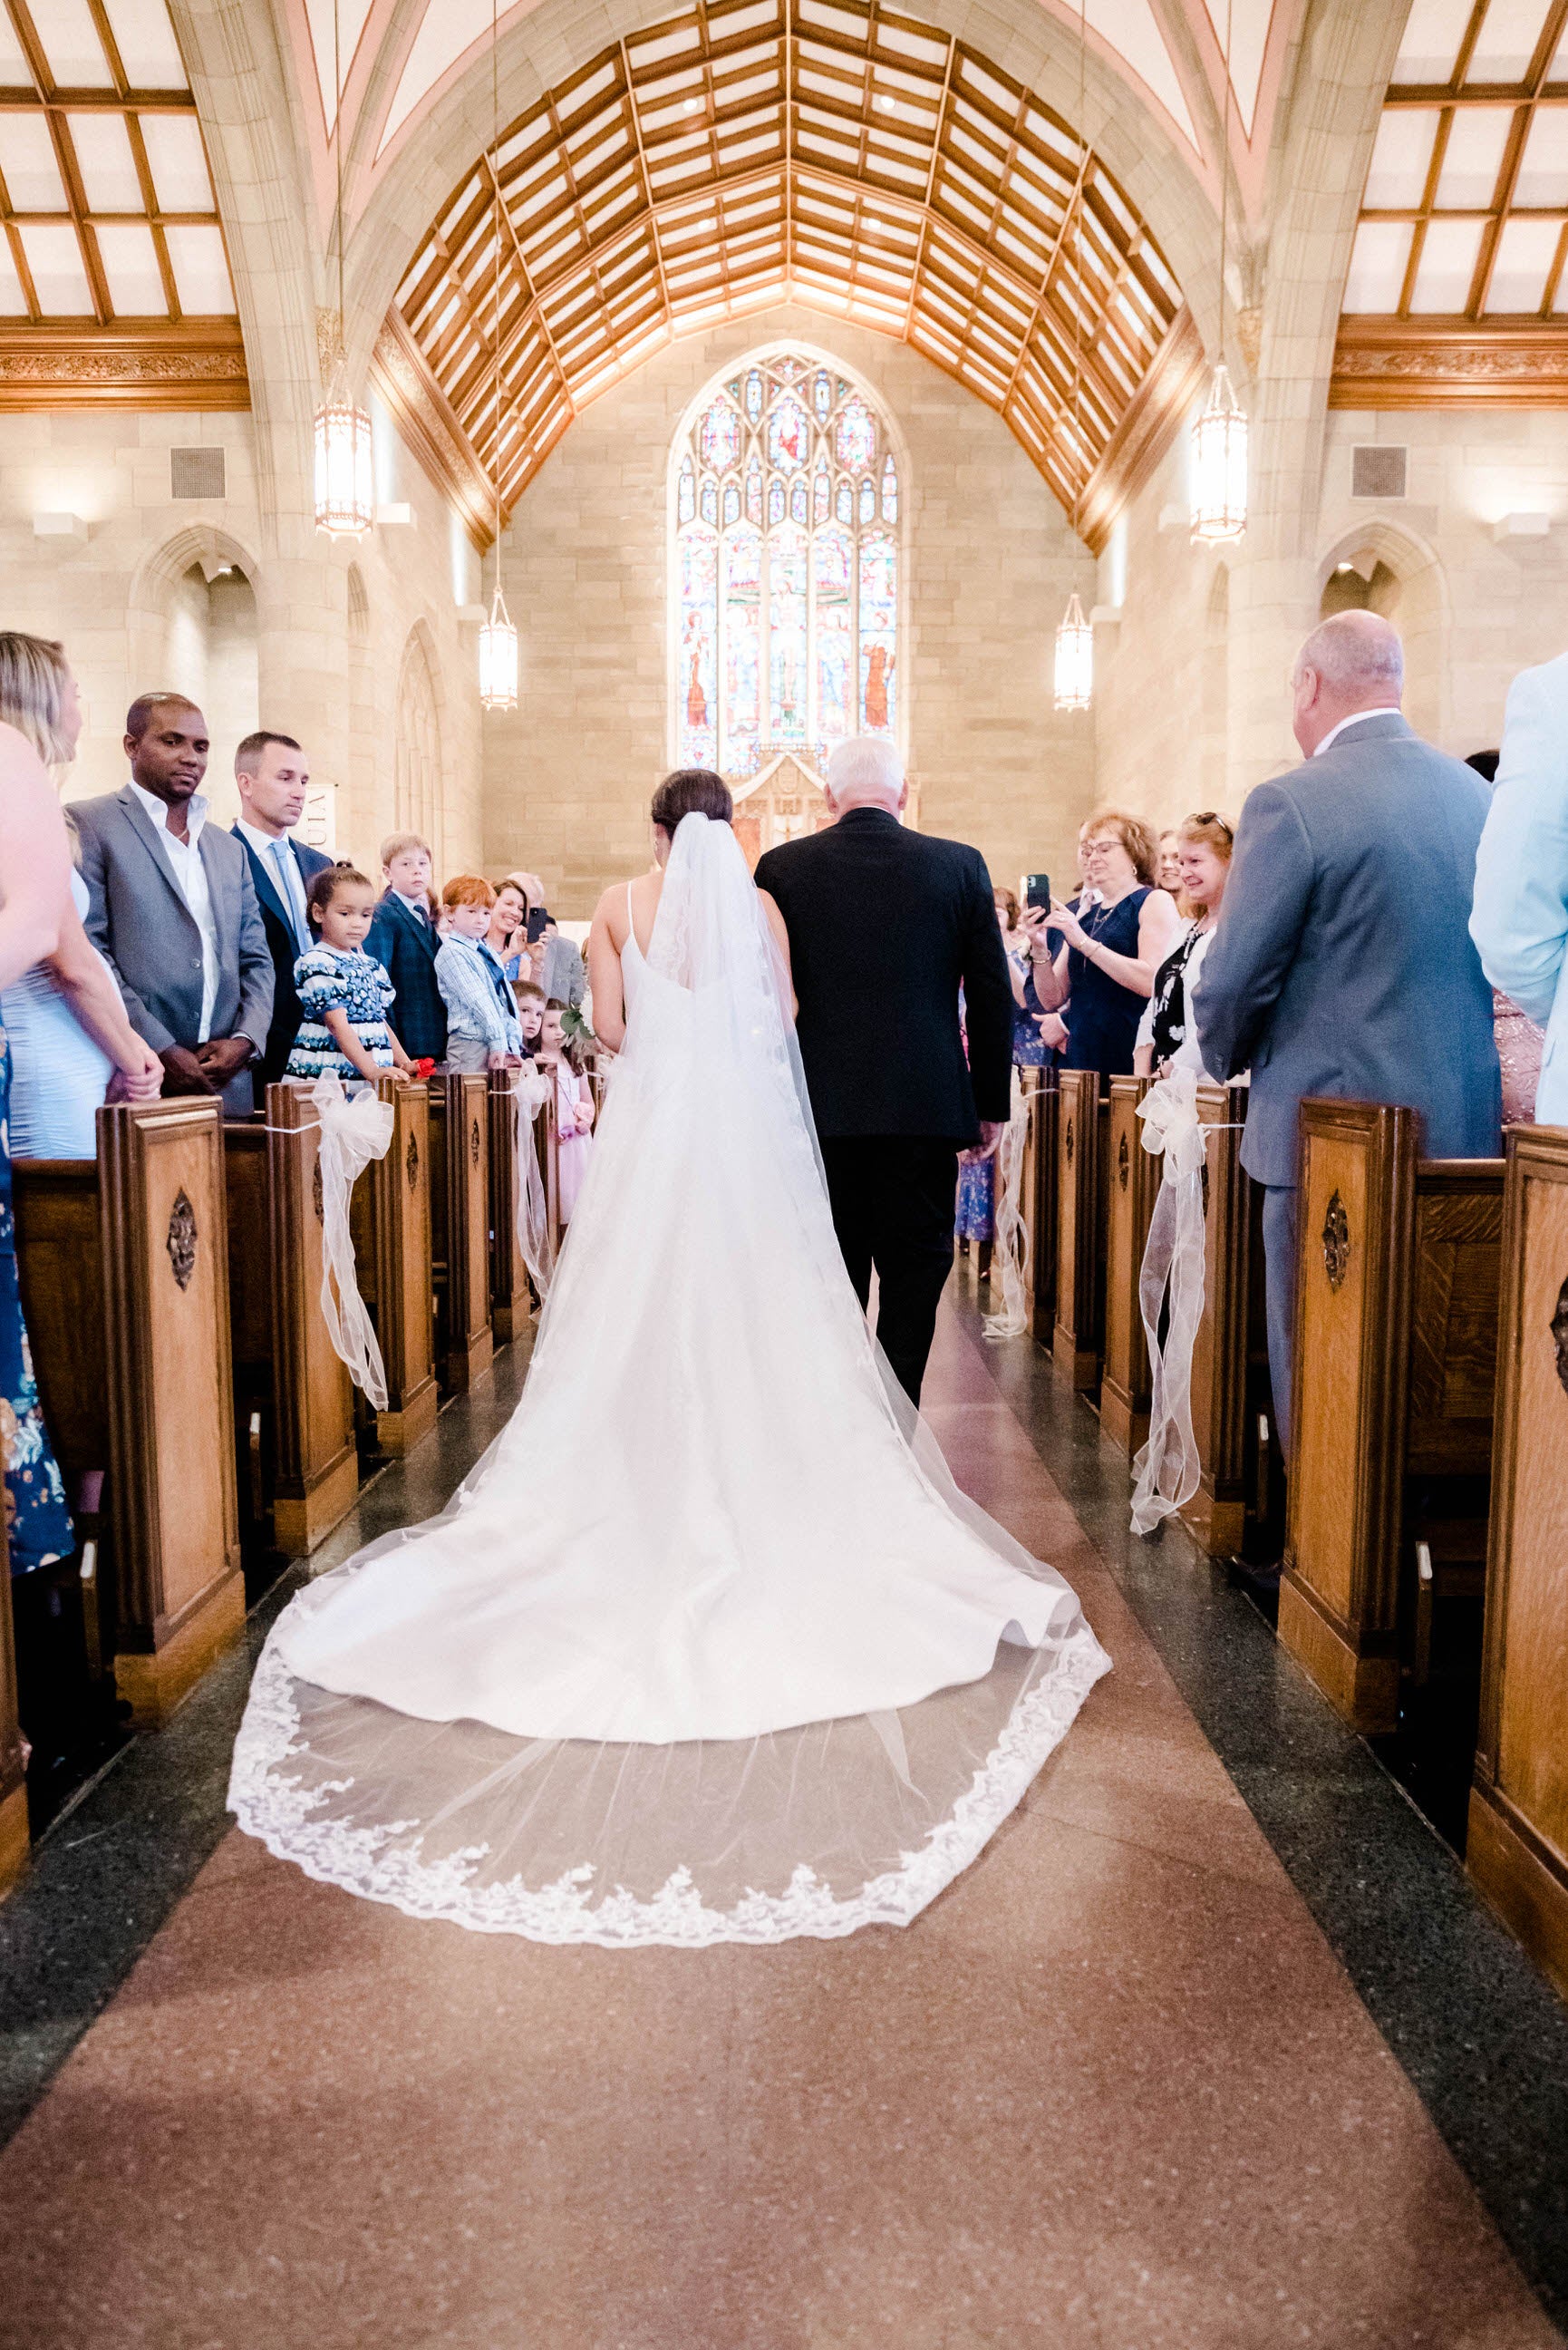 Calais French Lace Cathedral Veil | The Bridal Finery